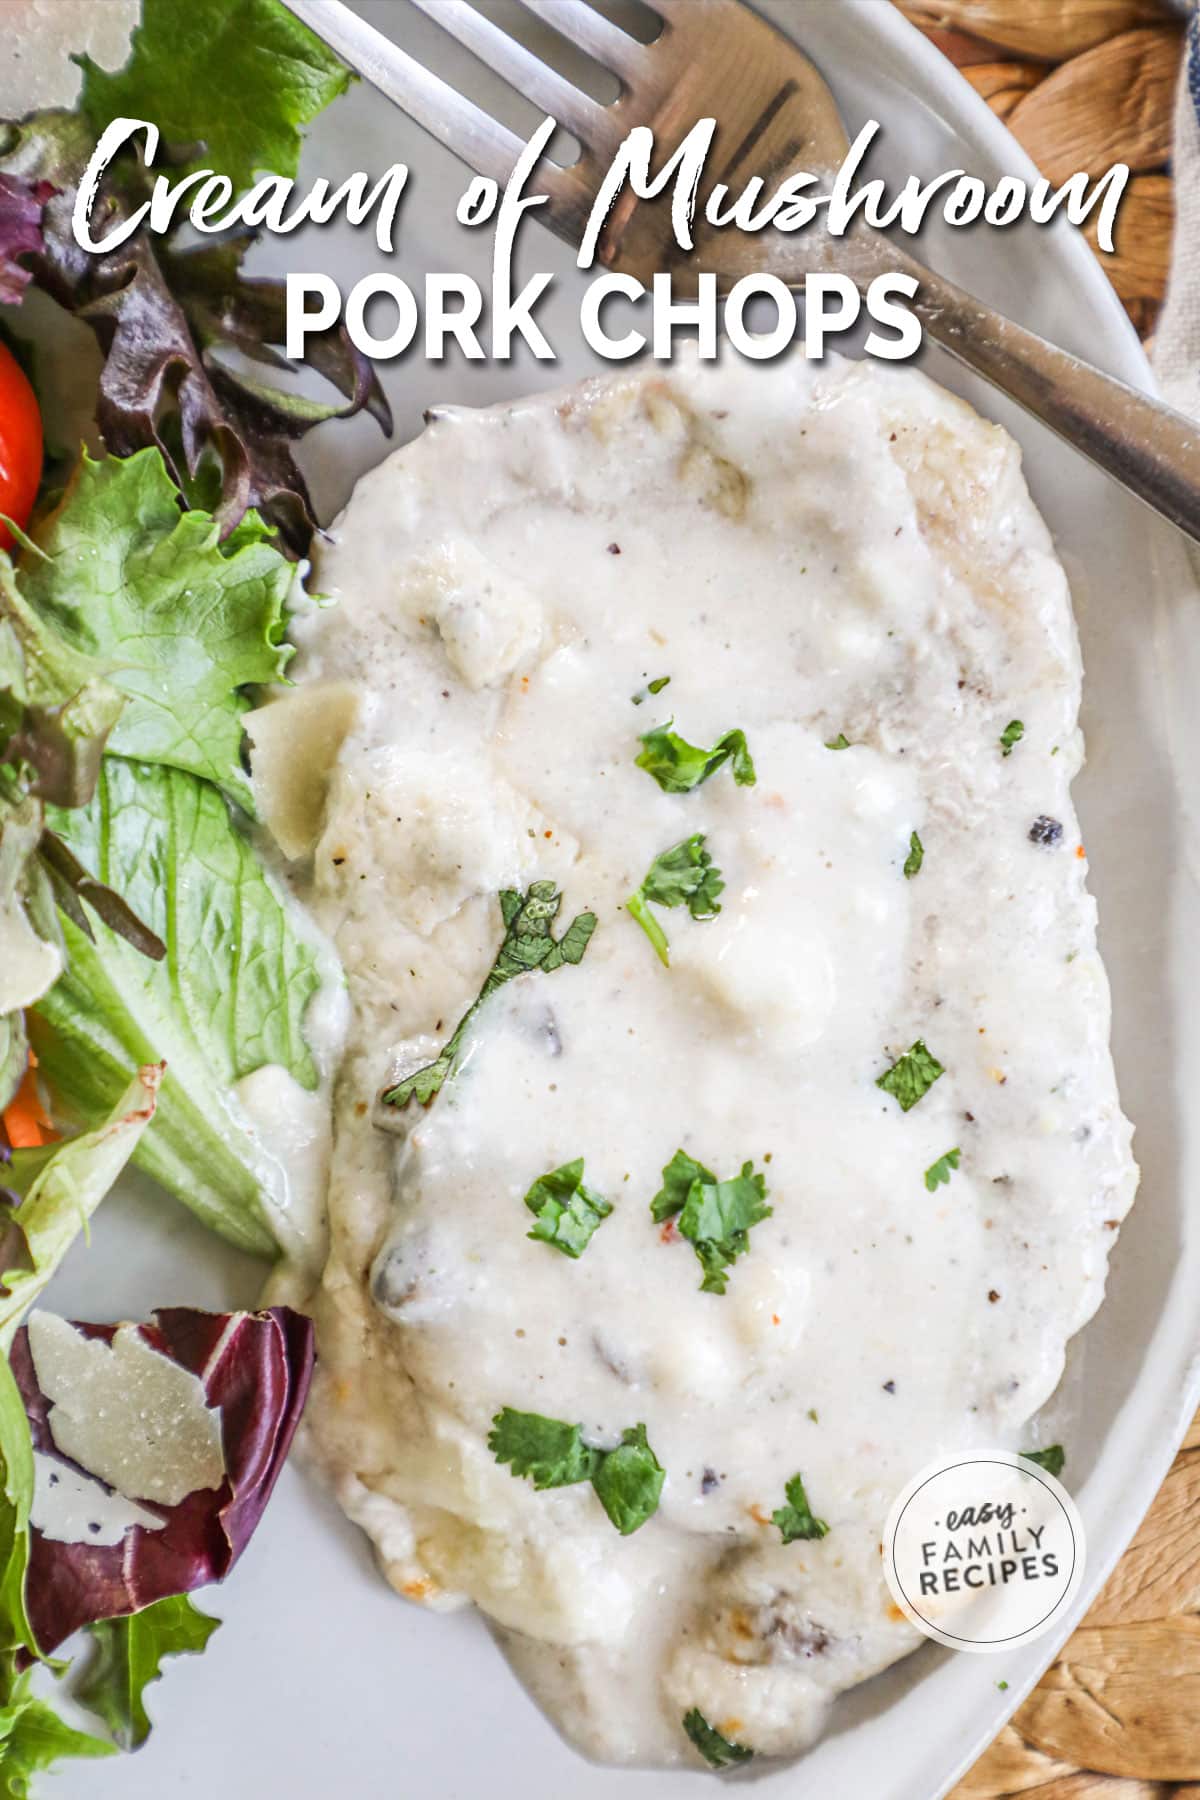 Baked cream of mushroom pork chop on a serving plate garnished with fresh herbs and plated with a fresh salad.